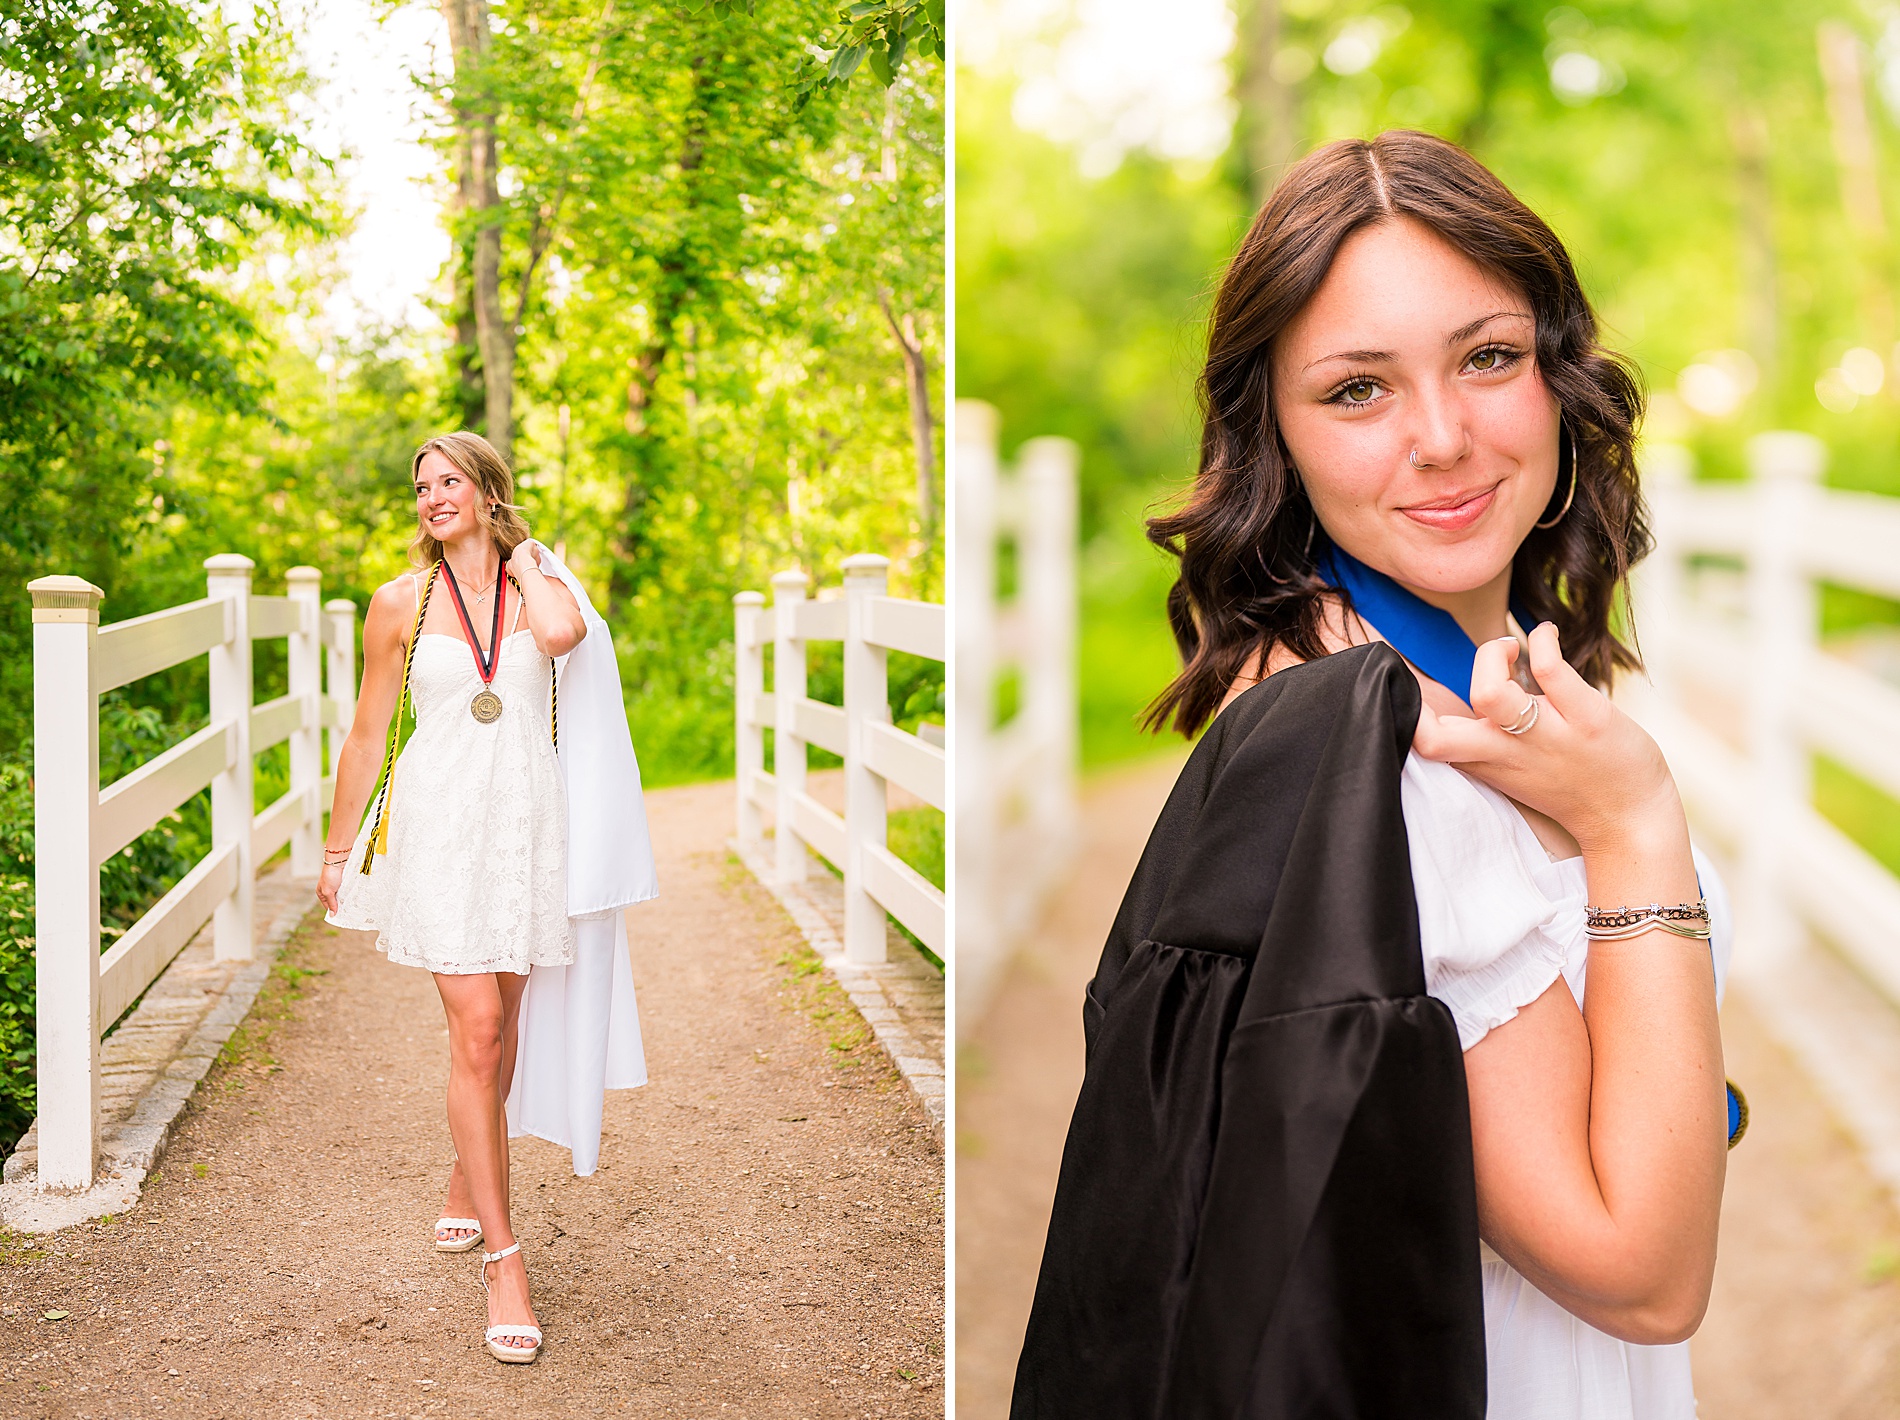 Senior Spokesmodels in cap and gown